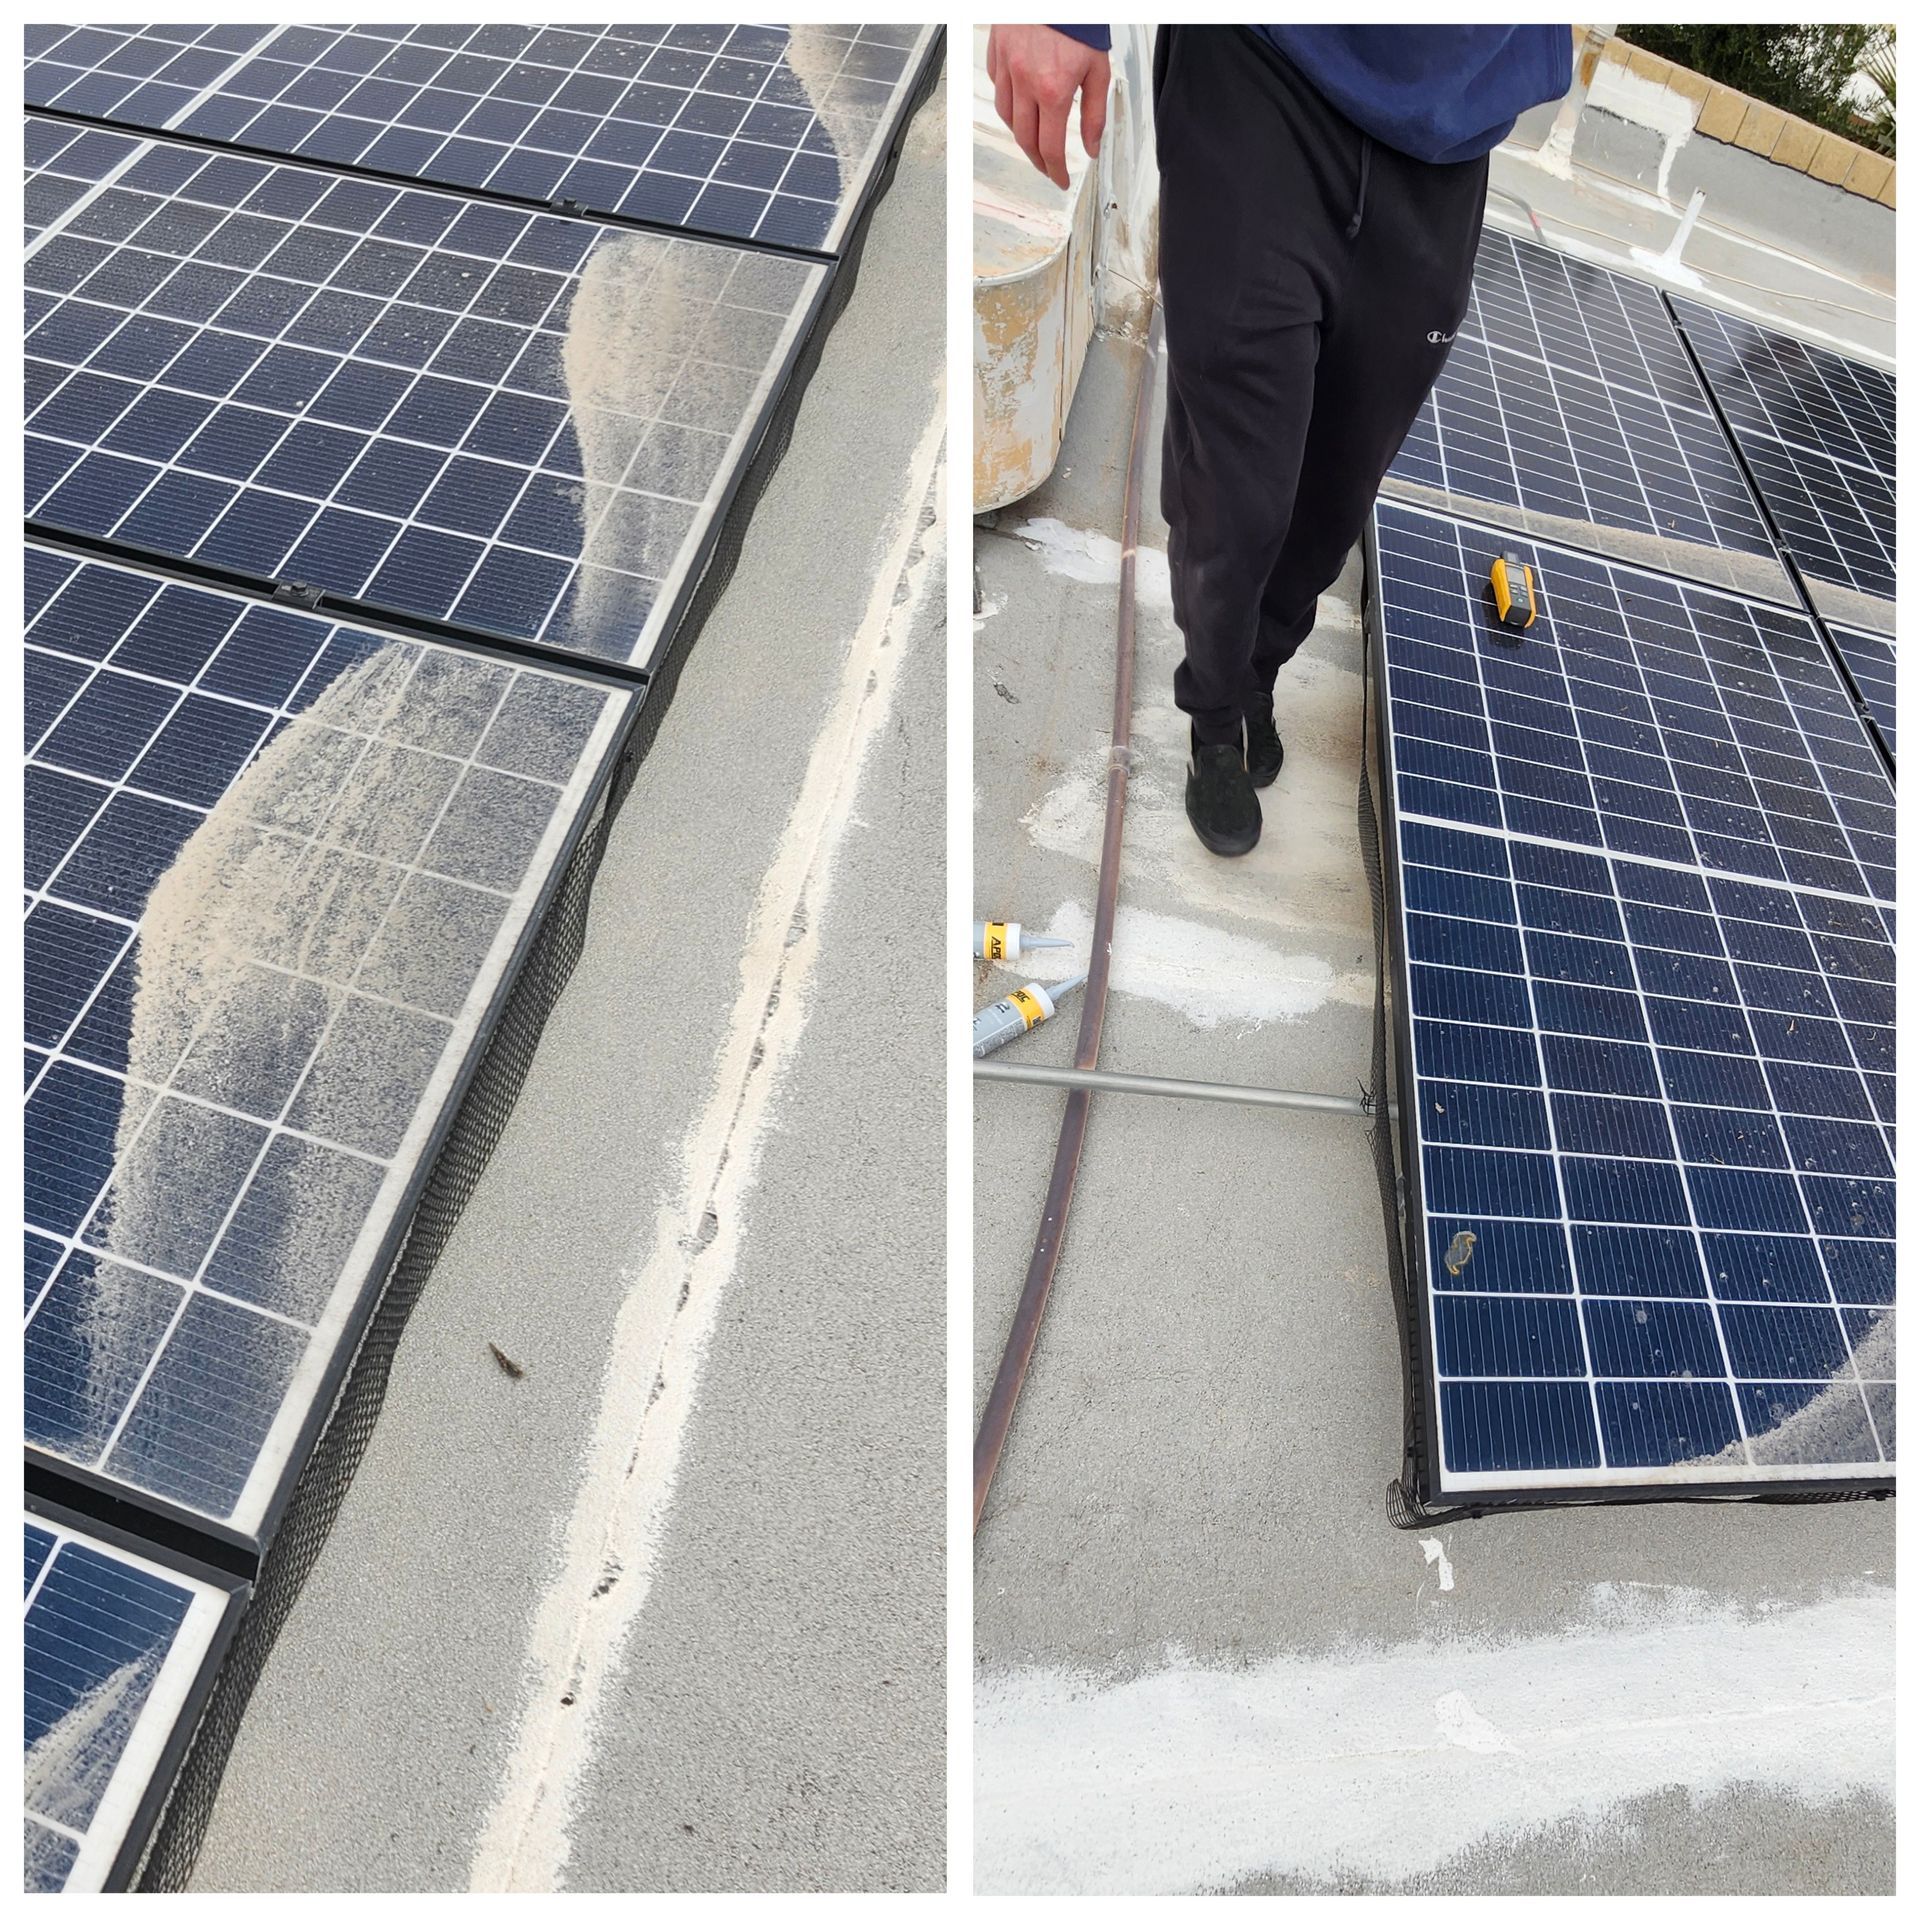 Flat solar panels causes drainage issues.